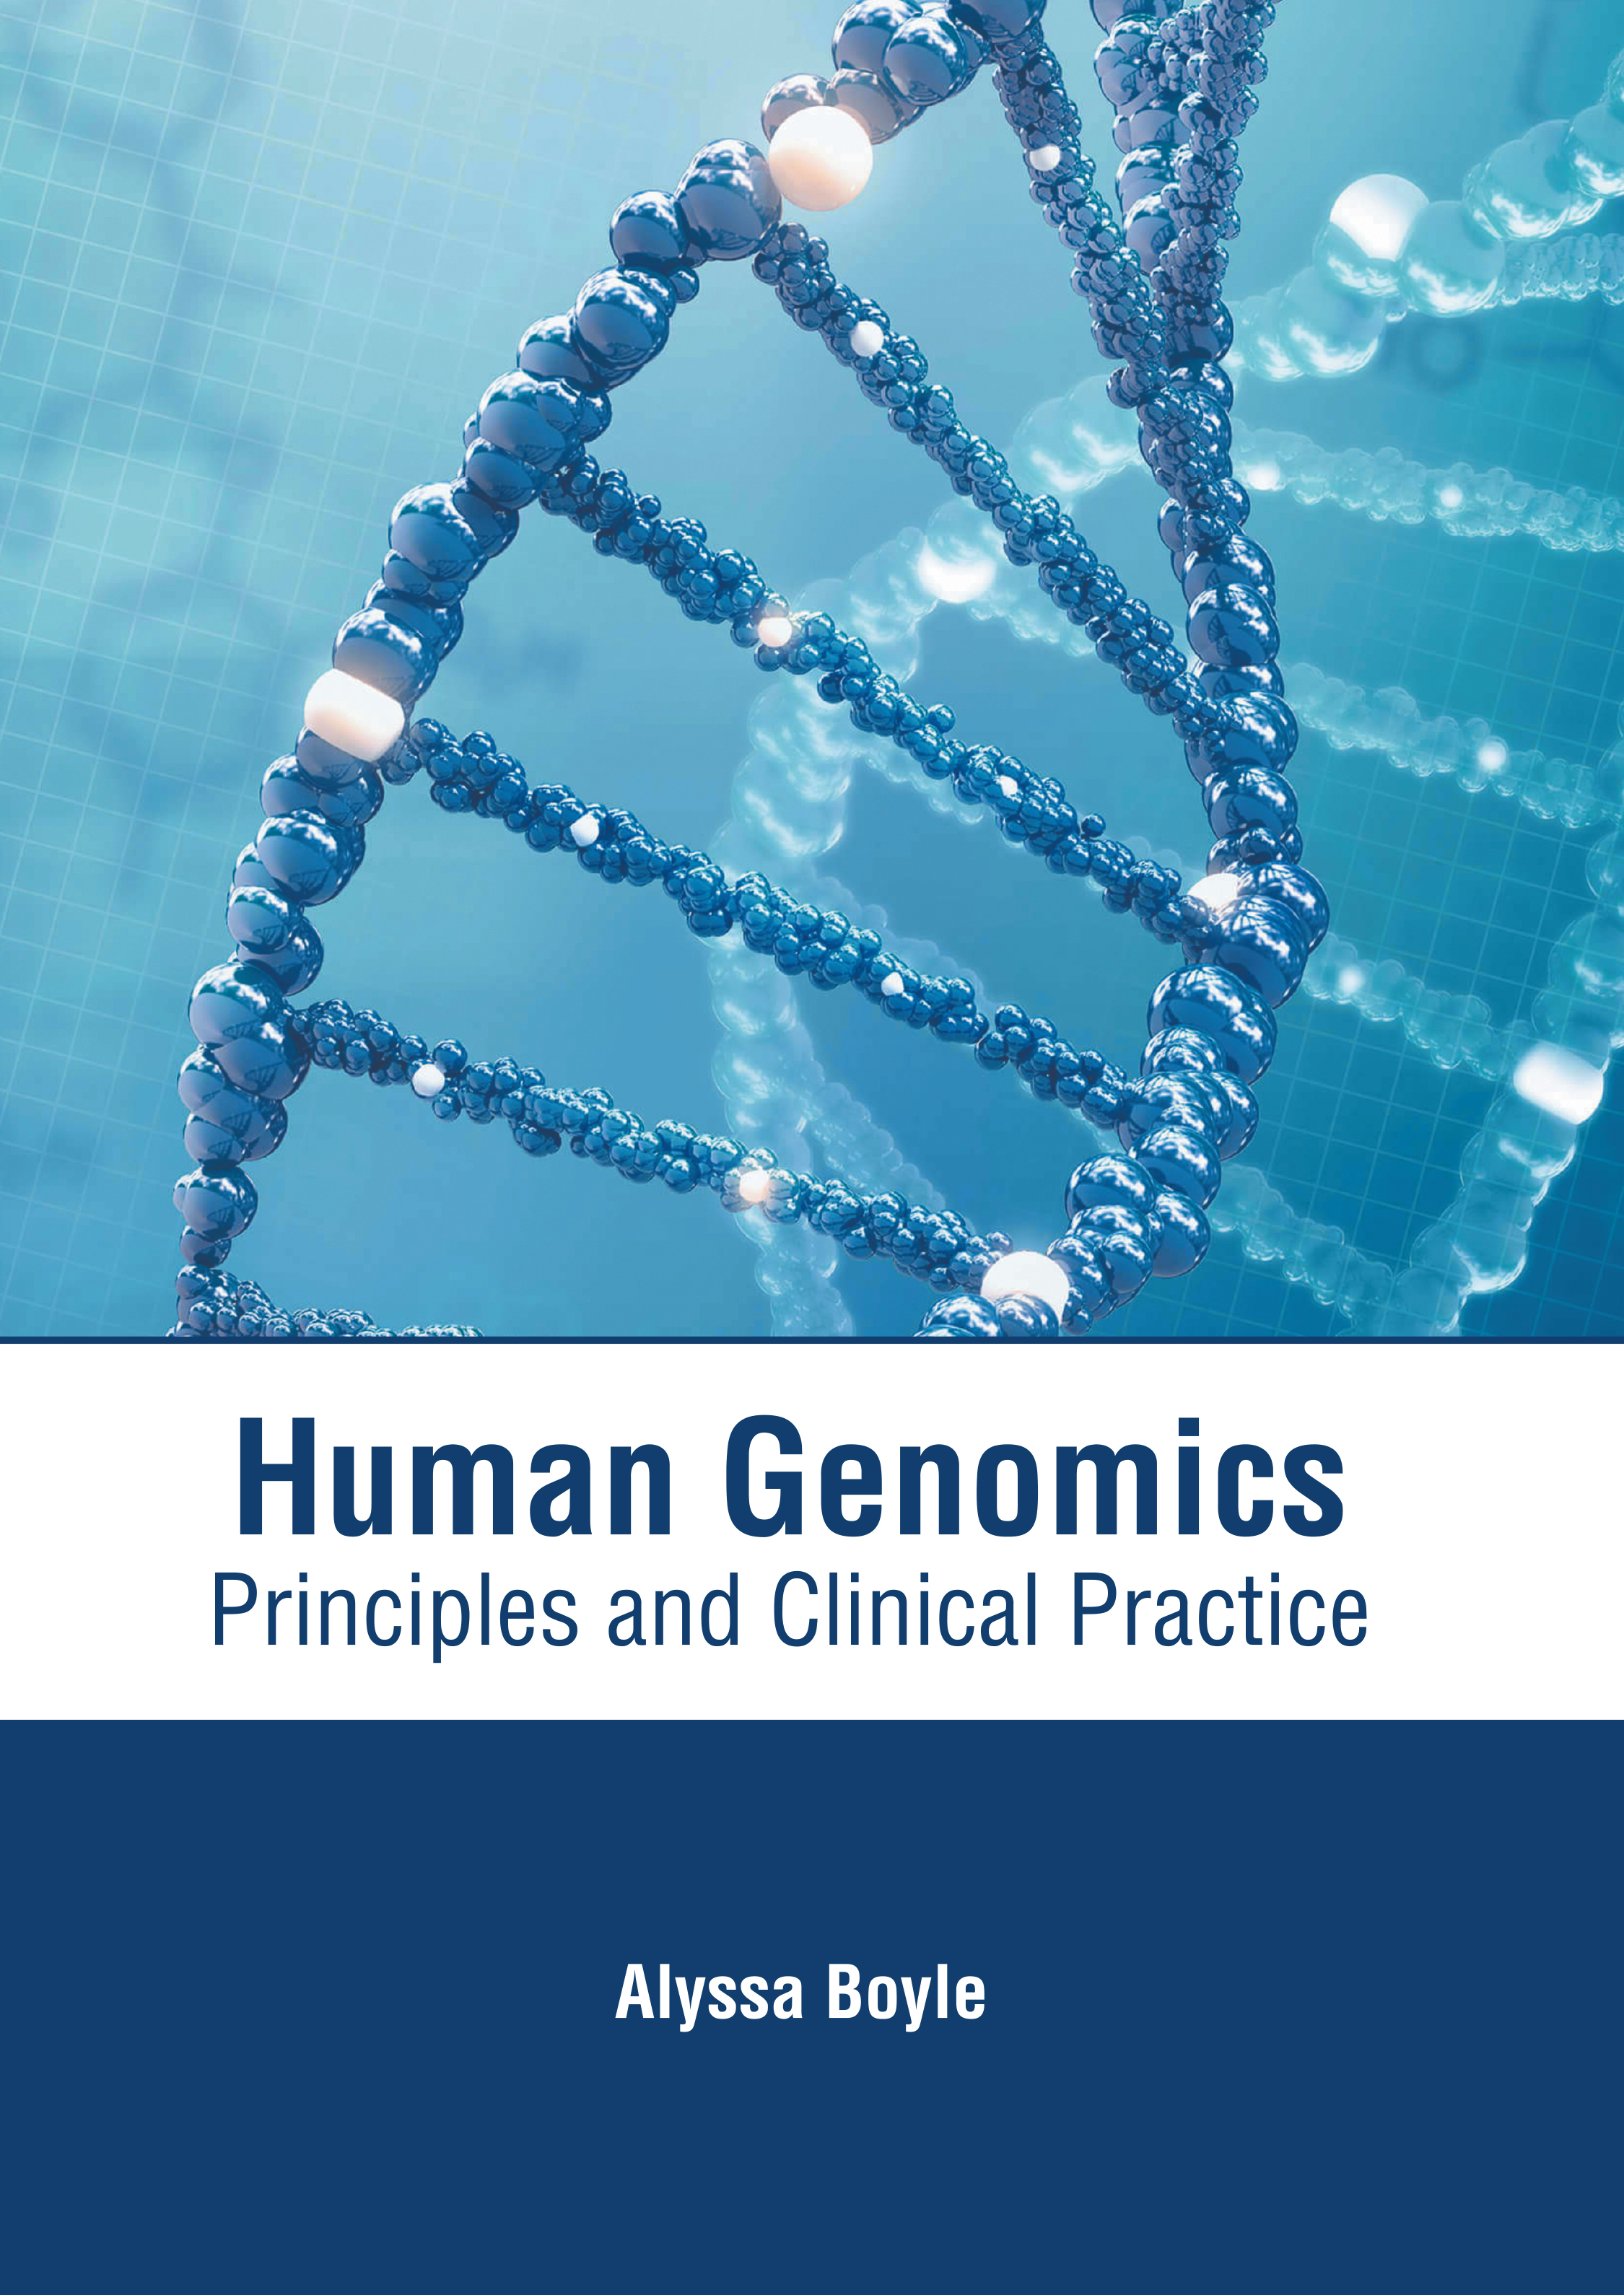 
medical-reference-books/microbiology/human-genomics-principles-and-clinical-practice-9781639272532